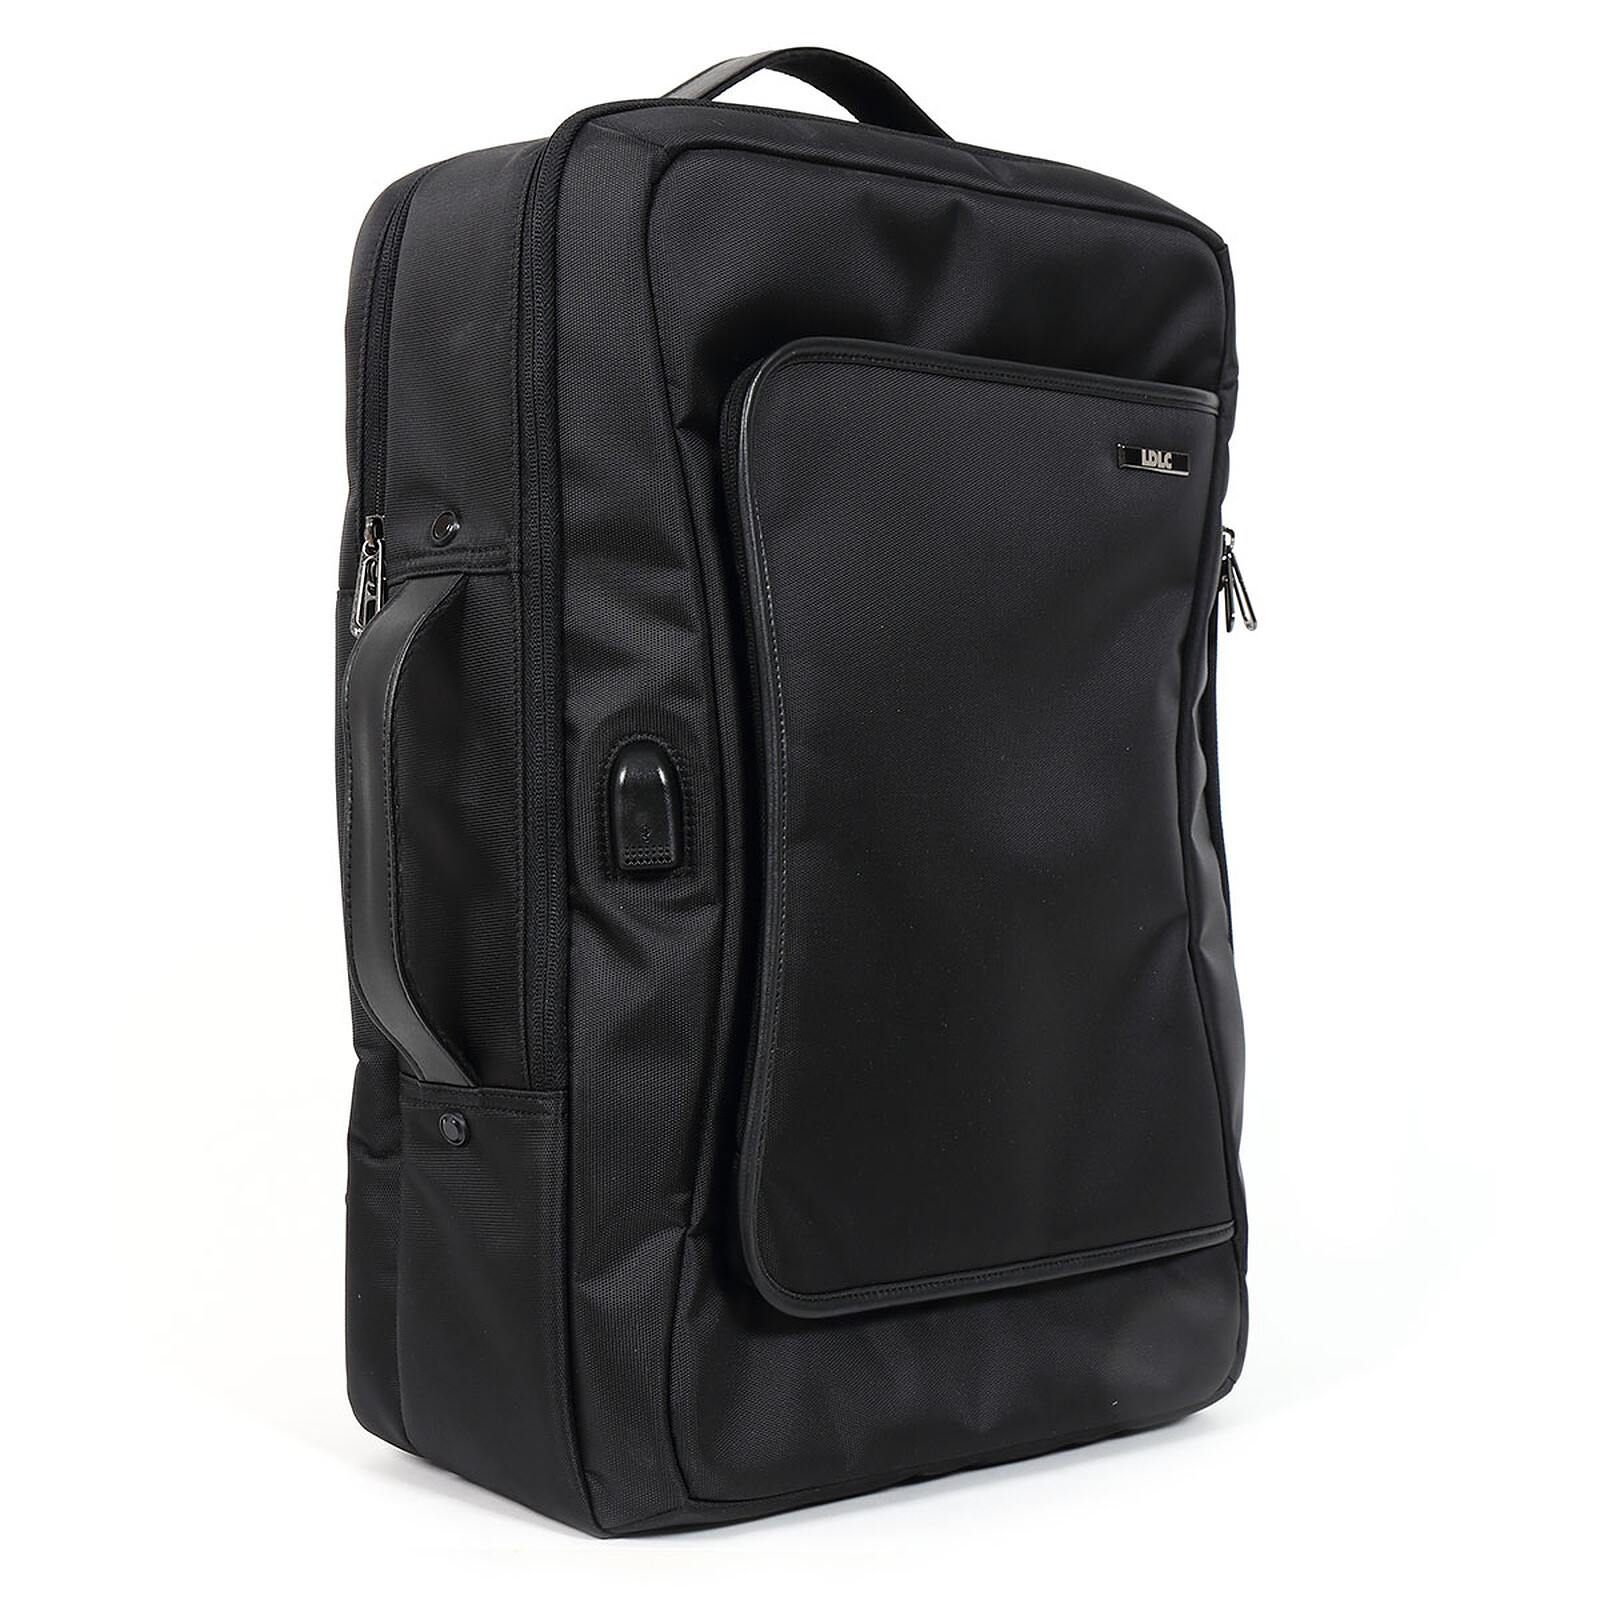 LDLC Neo Protect 17 - Bag, backpack, case - LDLC 3-year warranty | Holy ...